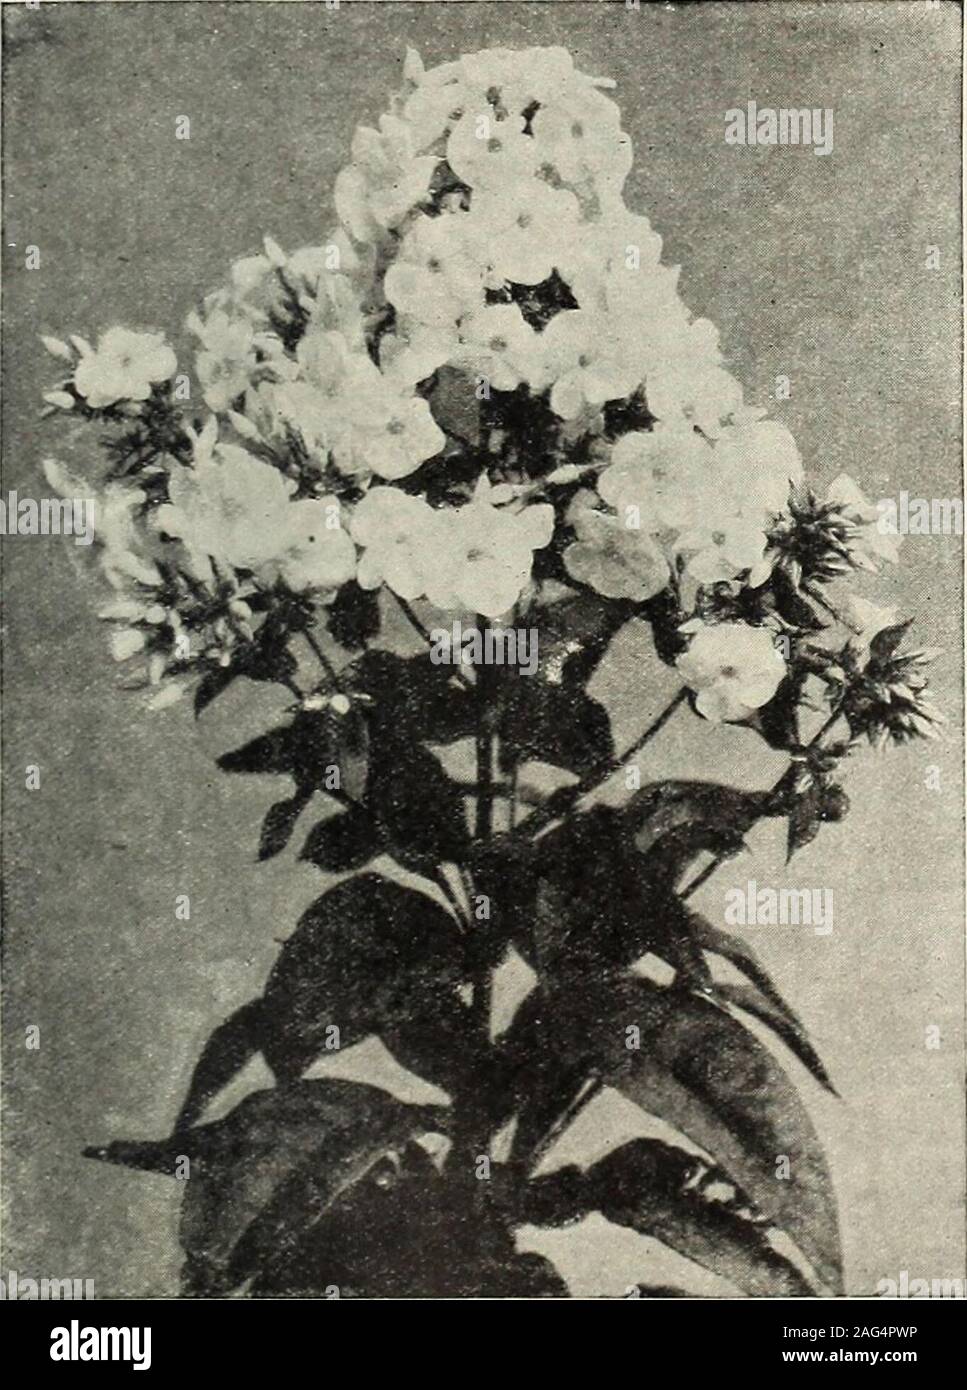 . Rawson's garden manual / W.W. Rawson & Co.. Hardy Phlox, Graflin von Lassburg (See page 146) Madame Crousse. A magnificent pure white, withverj large blooms. Buds especiallyfine. 60 cts. each, $6 per doz.Marie Lemoine. A beautiful sulphur-white lightly shaded chamois Enor-mous flowers of the finest form. 60 cts.each, $6 per doz.Mad. de Verneville. A very chaste,creamy white variety. By far the finestof its shade. 75 cts. each, $8.50 per doz.Madame Emile Galle. Very large cup-shaped imbricated flower of soft lilac,with center shaded soft flesh-color andcream. 60 cts. each, $6 per doz.Madame F Stock Photo